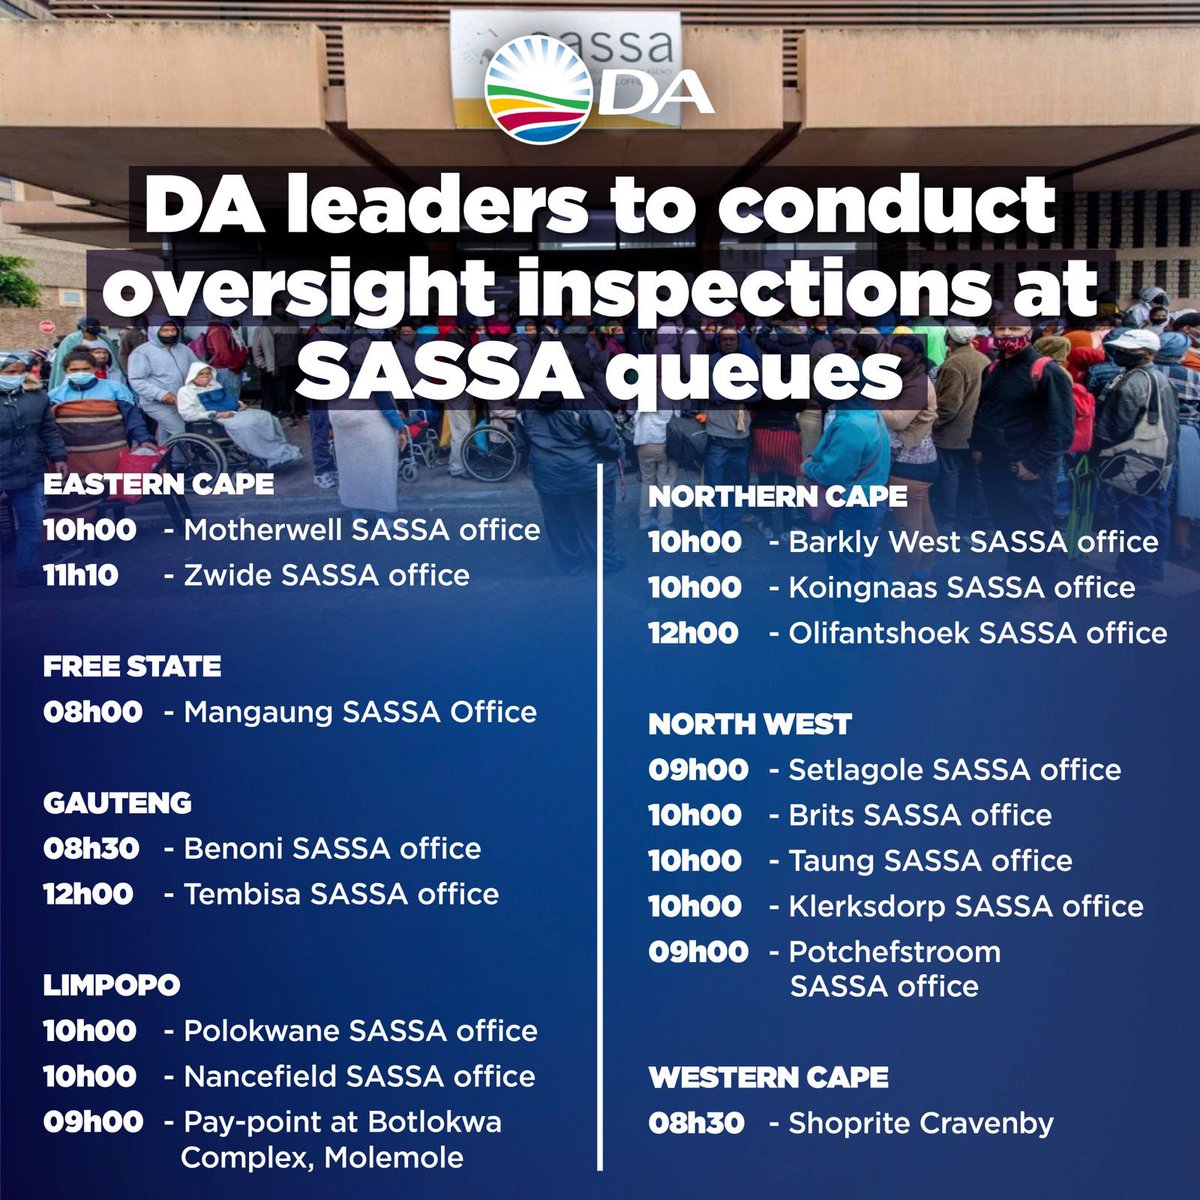 📍 Today the DA leadership is conducting oversight inspections at SASSA pay-points across the country to interact with long-suffering residents who have to stand in long queues to collect their social grants. The DA is working hard to protect social grants from ANC corruption.